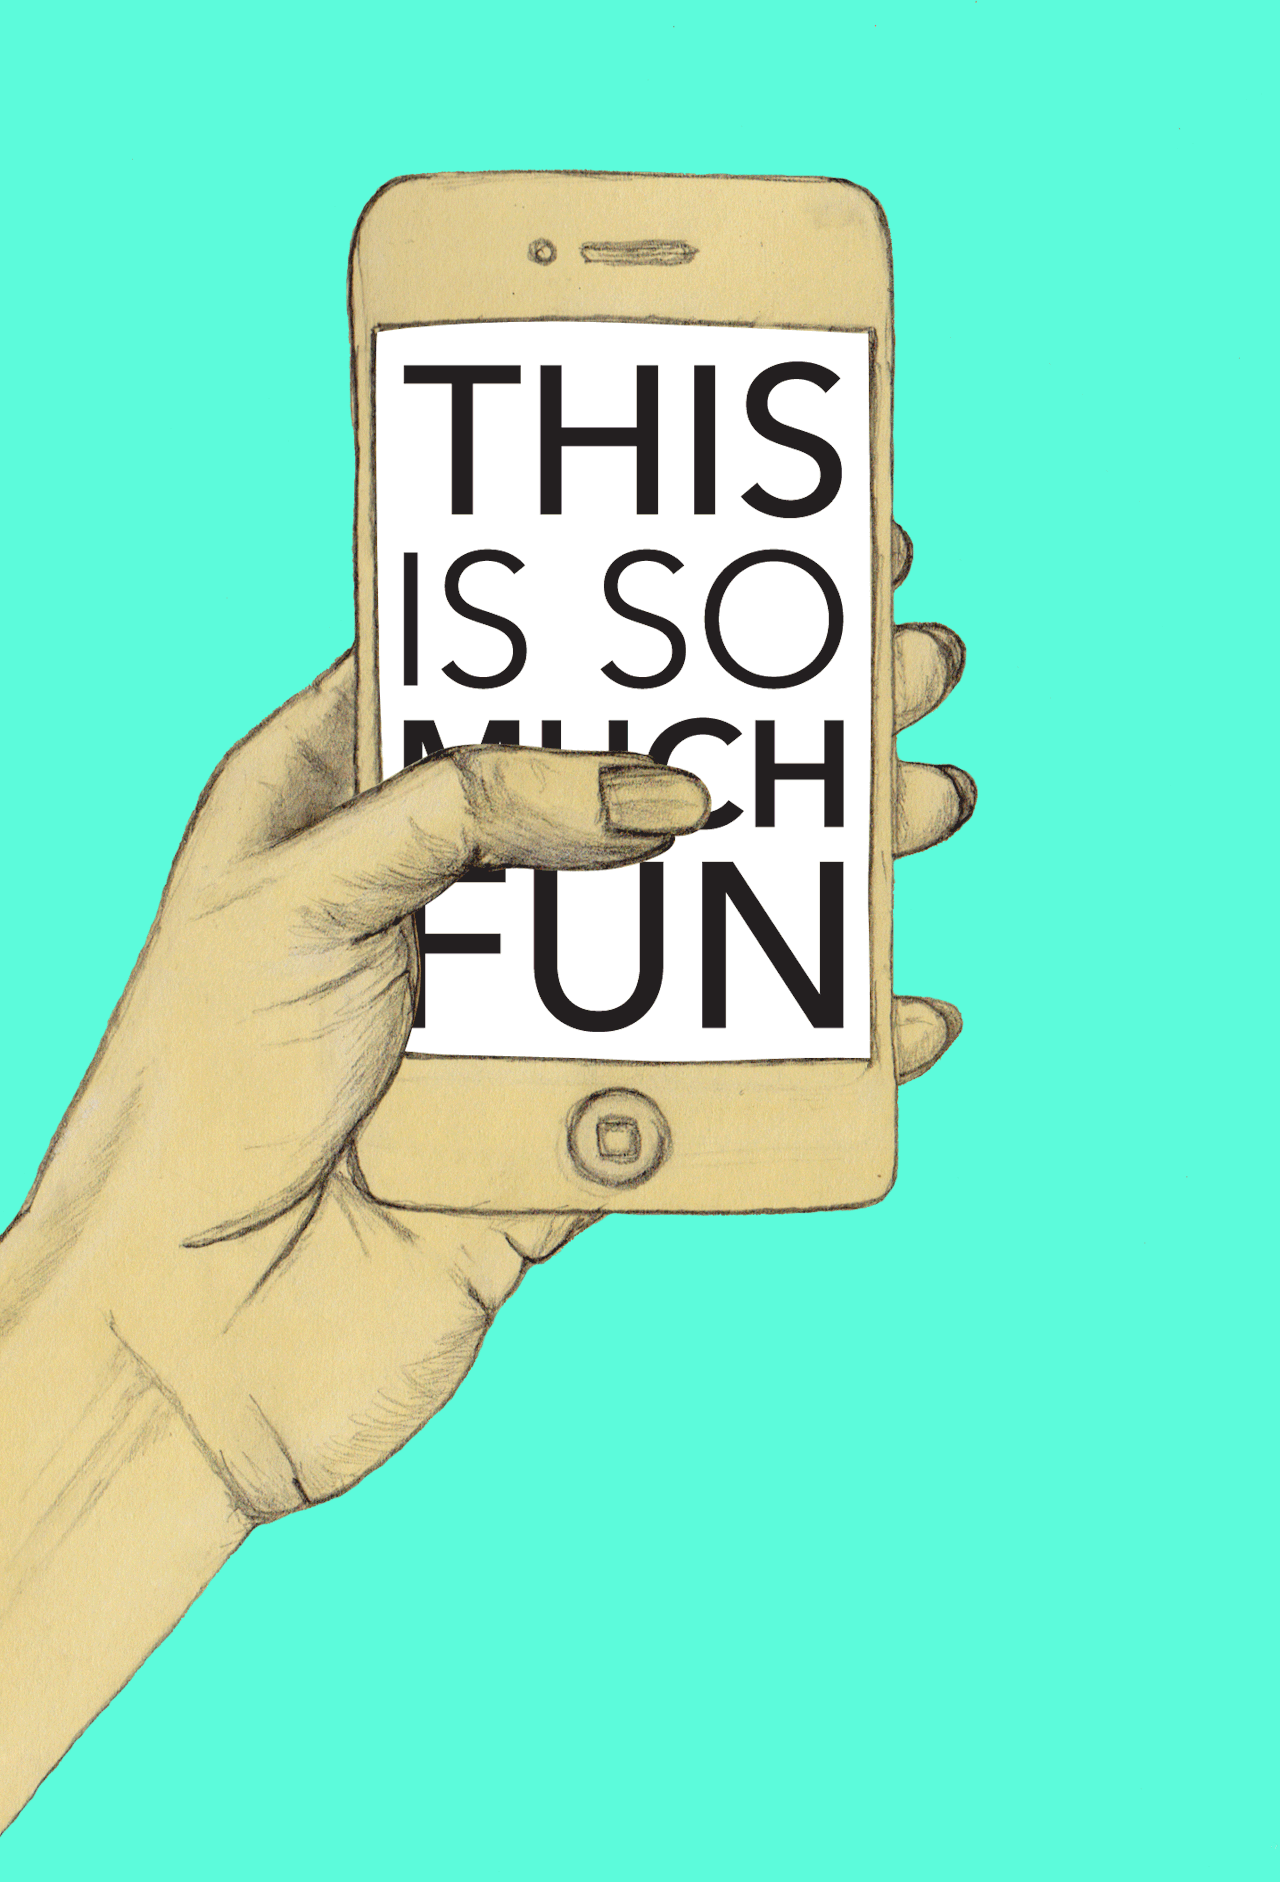 A GIF of someone scrolling through an endless screen of "THIS IS SO MUCH FUN"